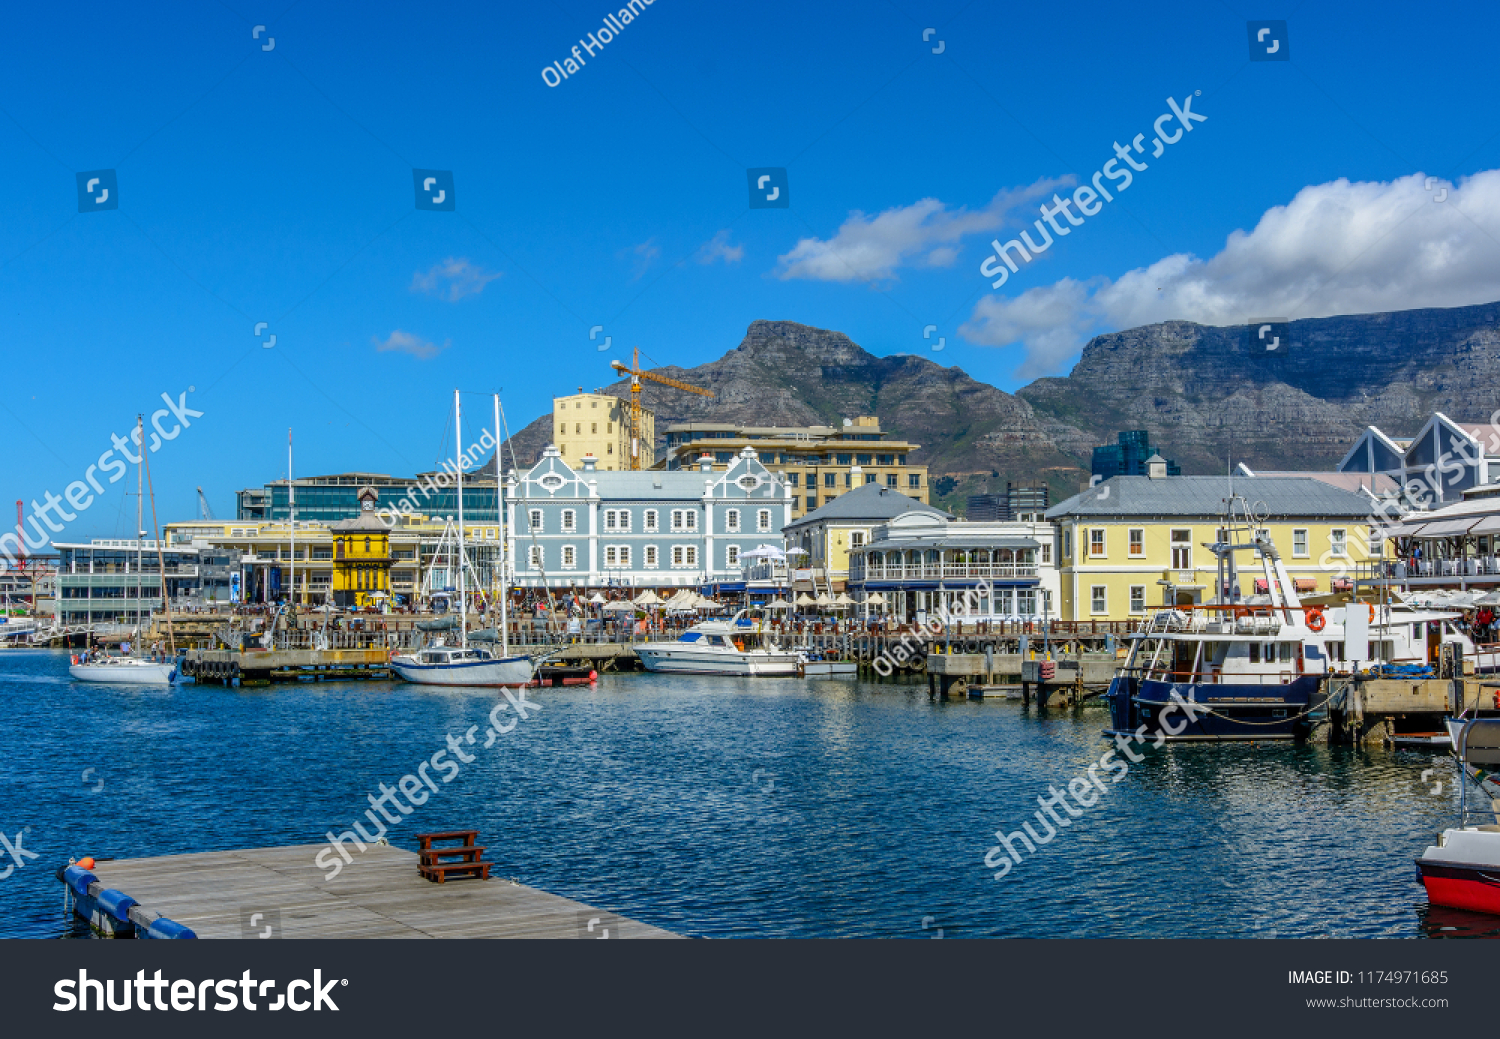 Bright color city and landscape panoramic view of the Table Mountain,Cape Town,South Africa, seen from V&A Waterfront with clock tower,boats in the sea harbor,bright sunny day,blue sky,clouds 